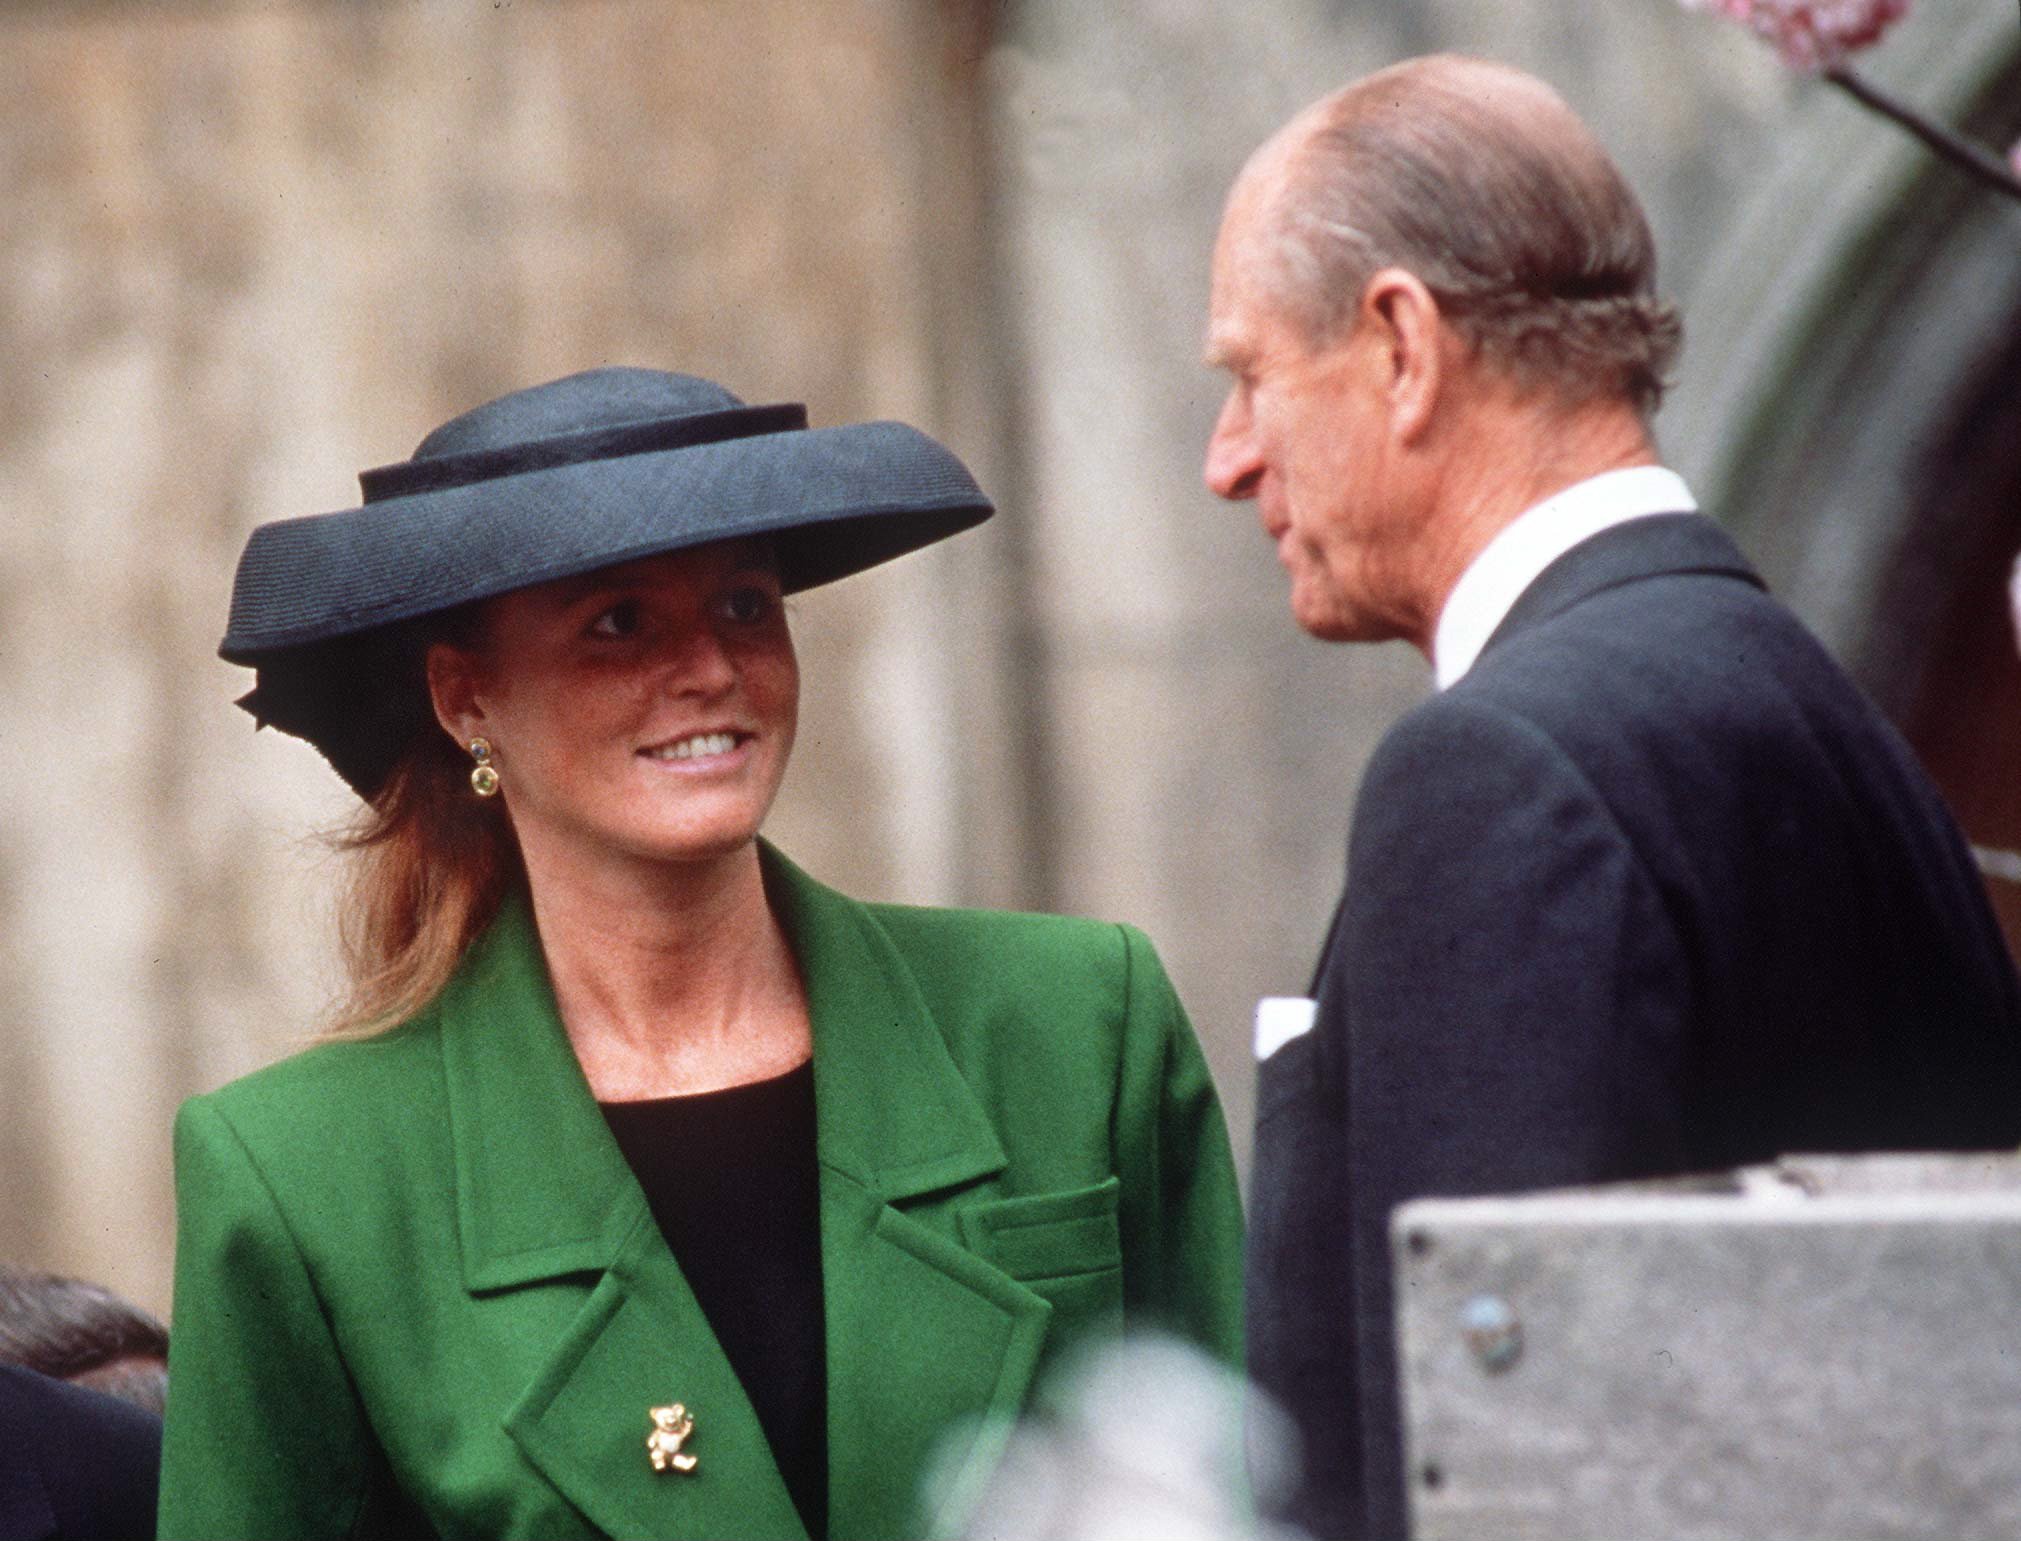 The Duke Of Edinburgh And The Duchess Of York At Easter Service At Windsor Circa 1990s. | Source: Getty Images 